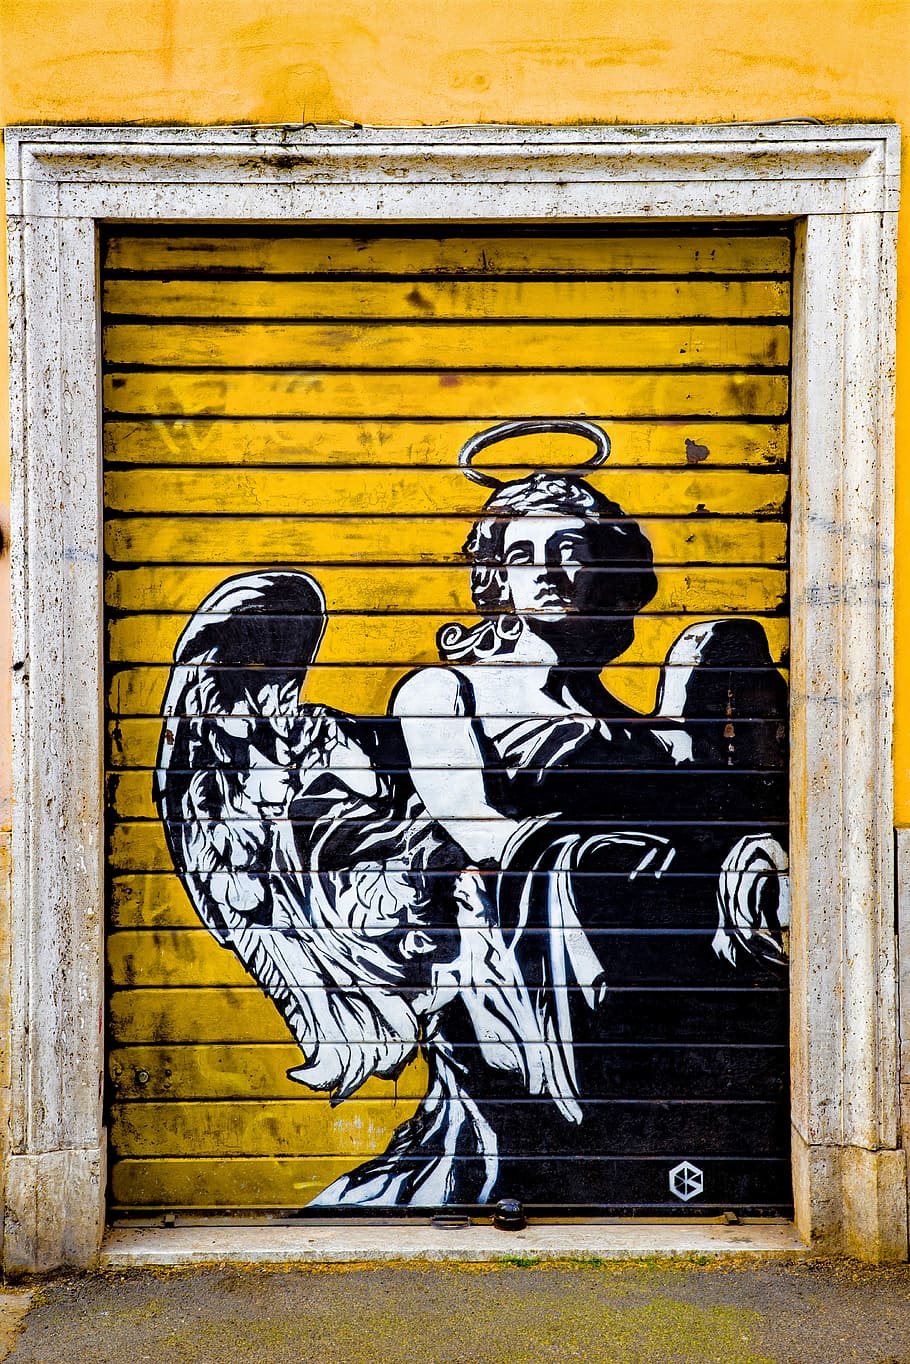 Street art of an angel painted on a yellow garage door in Rome, Italy - Graffiti